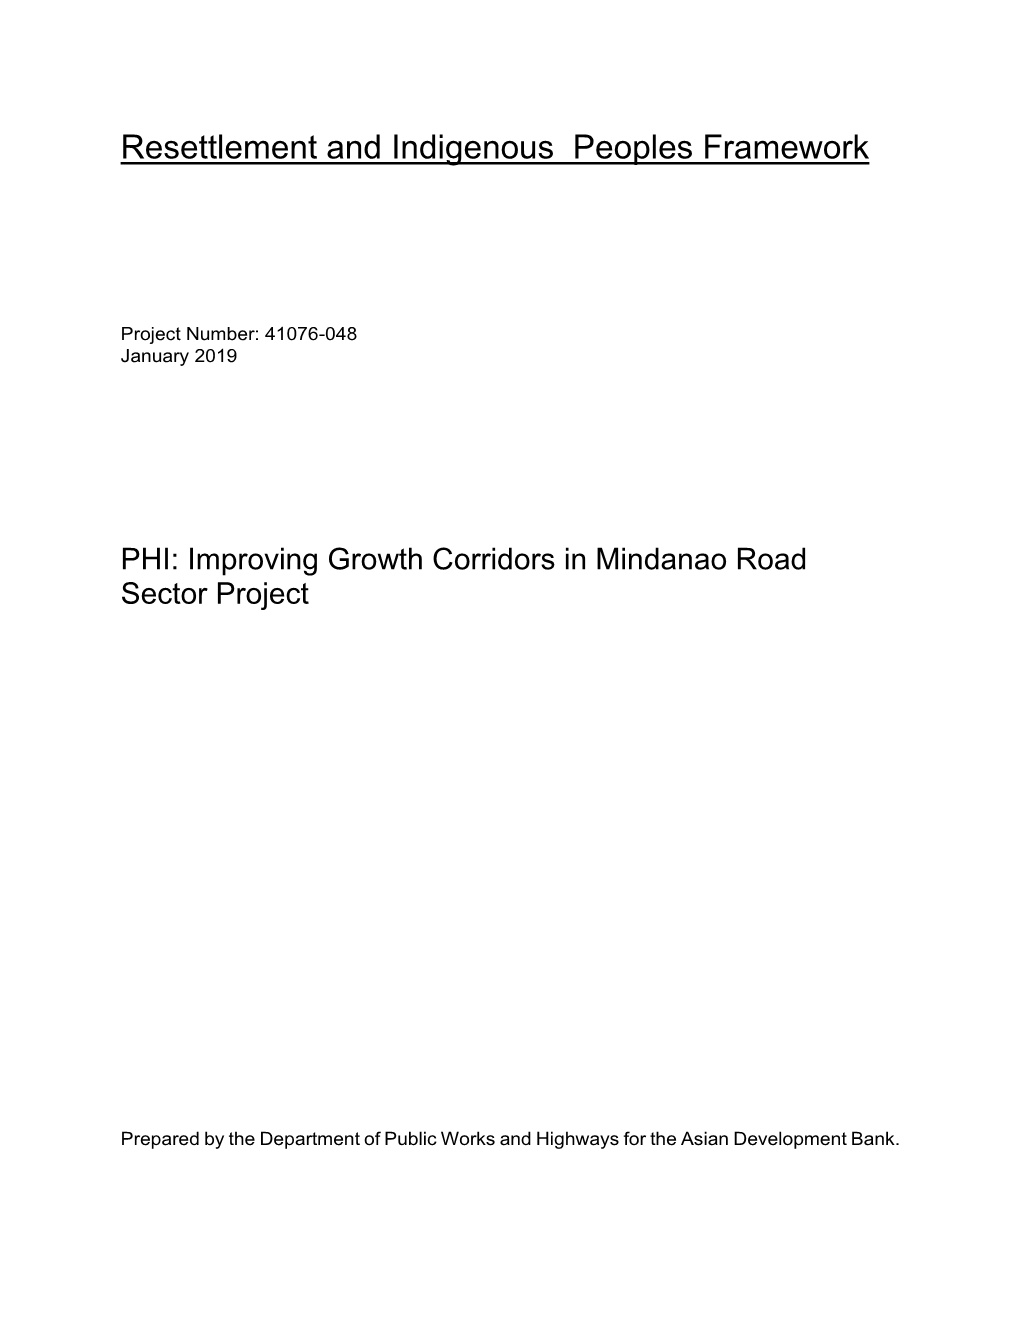 41076-048: Improving Growth Corridors in Mindanao Road Sector